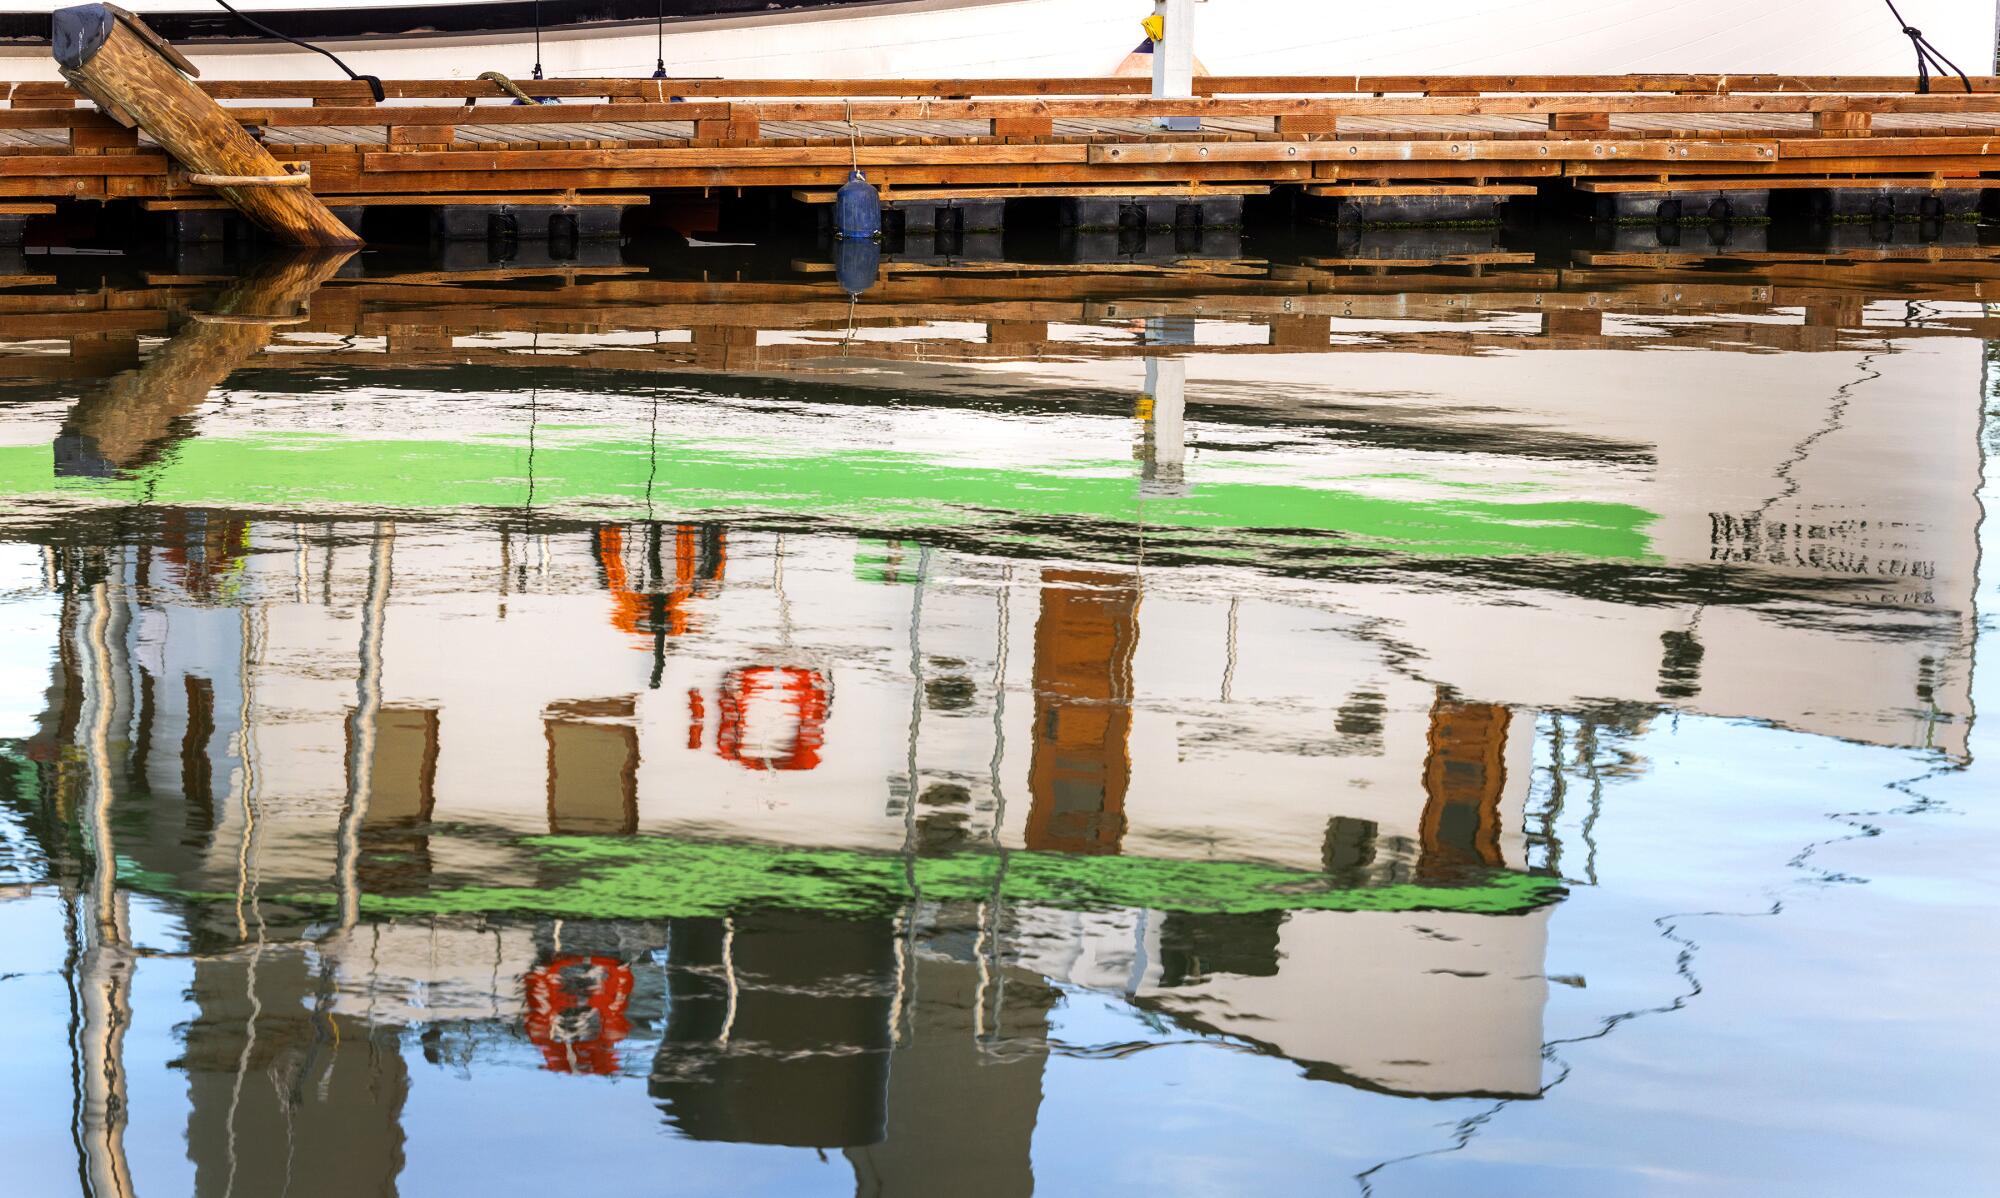 A reflected image of a green and white boat in the water alongside a pier.